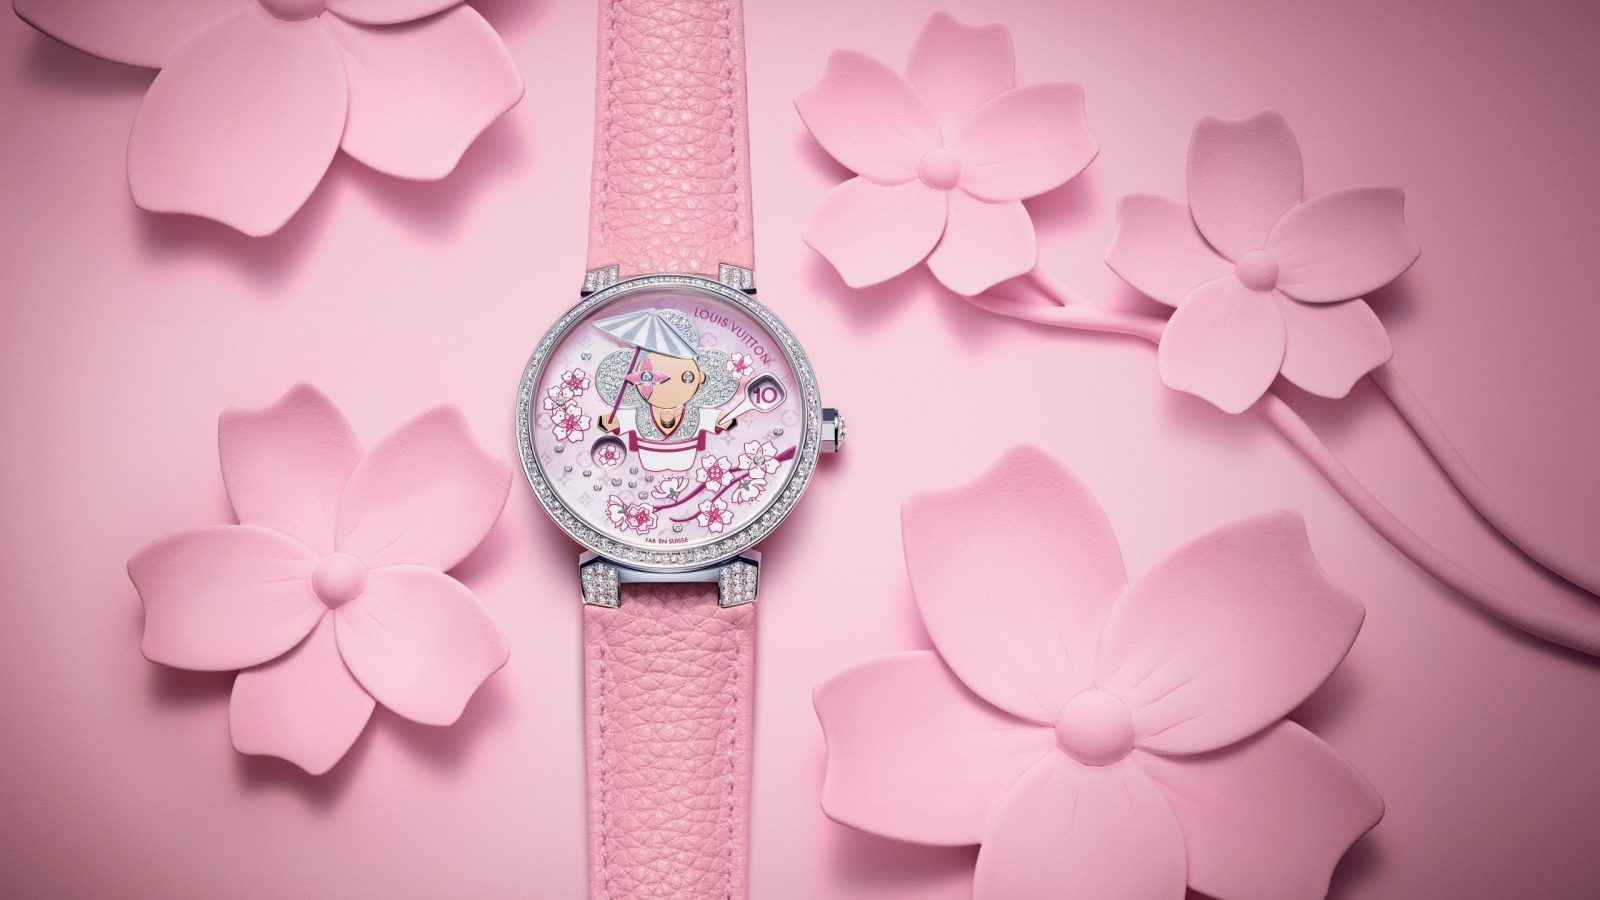 House of dreams: 4 watchmaking novelties to know from Louis Vuitton